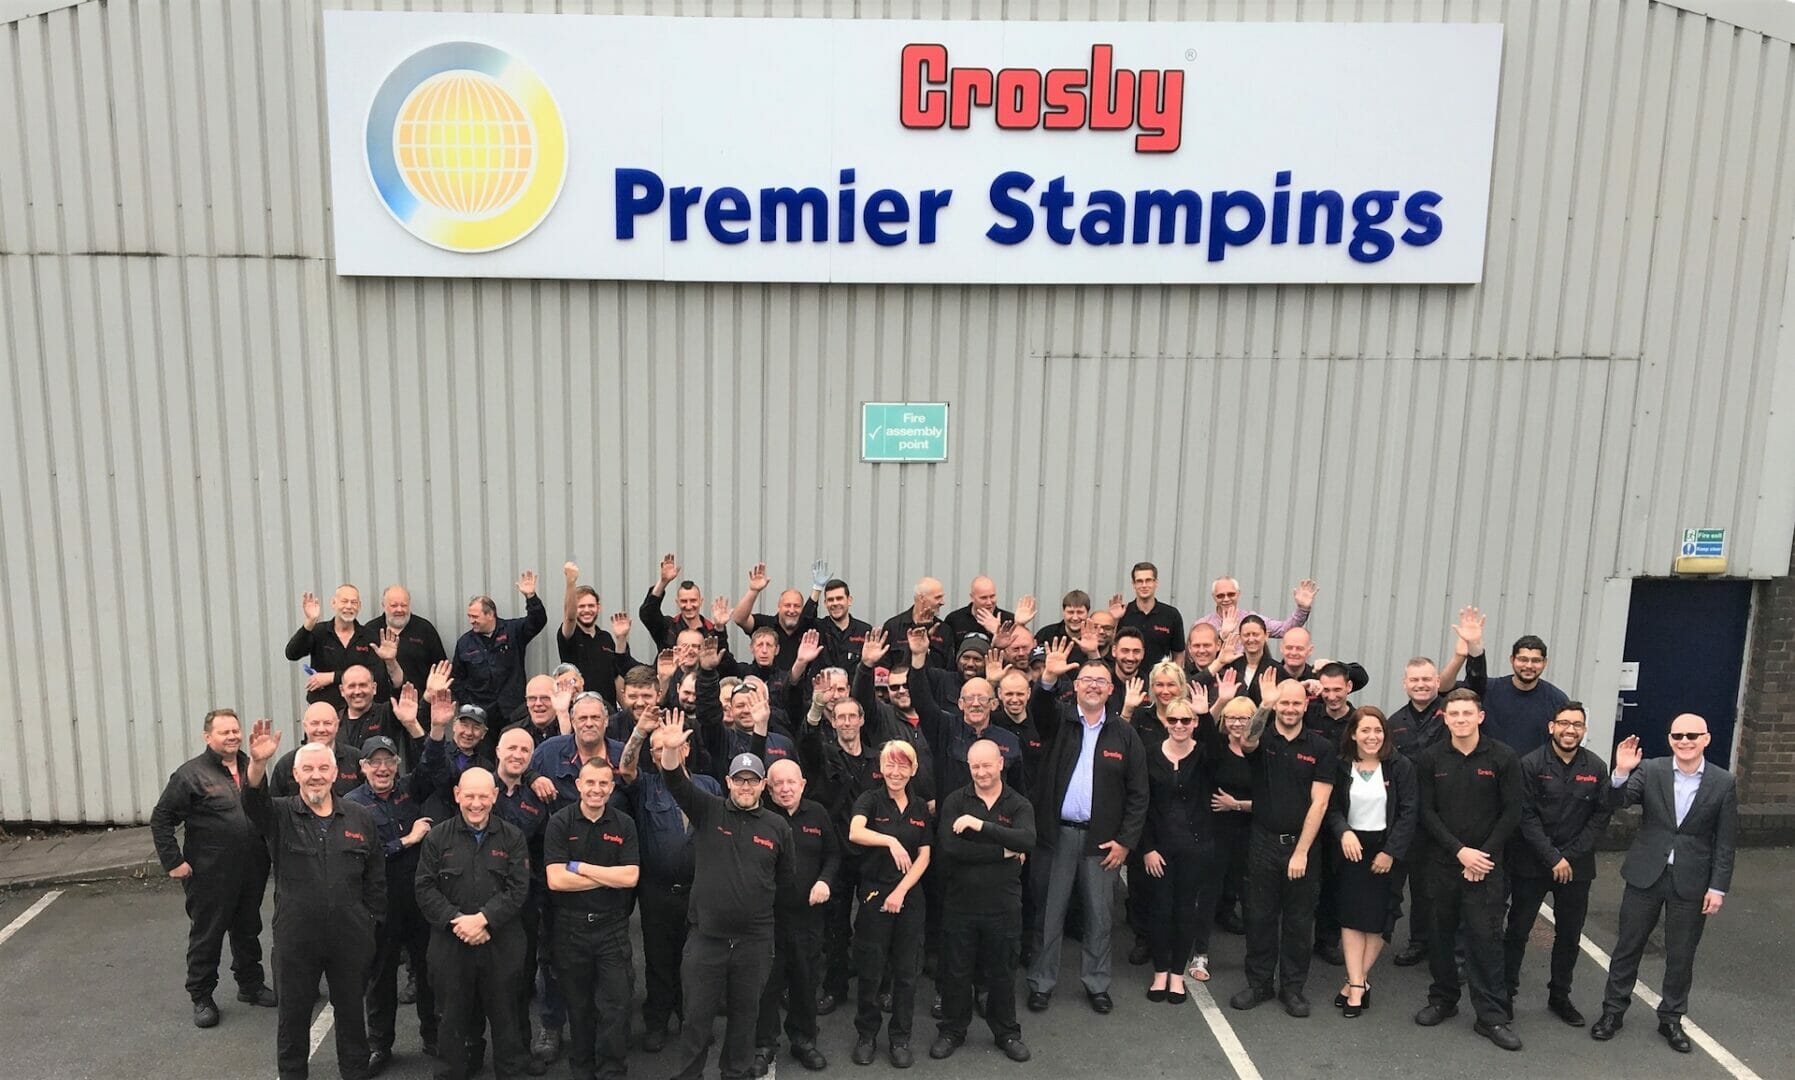 Crosby to Mark 100 Years of Premier Stamping